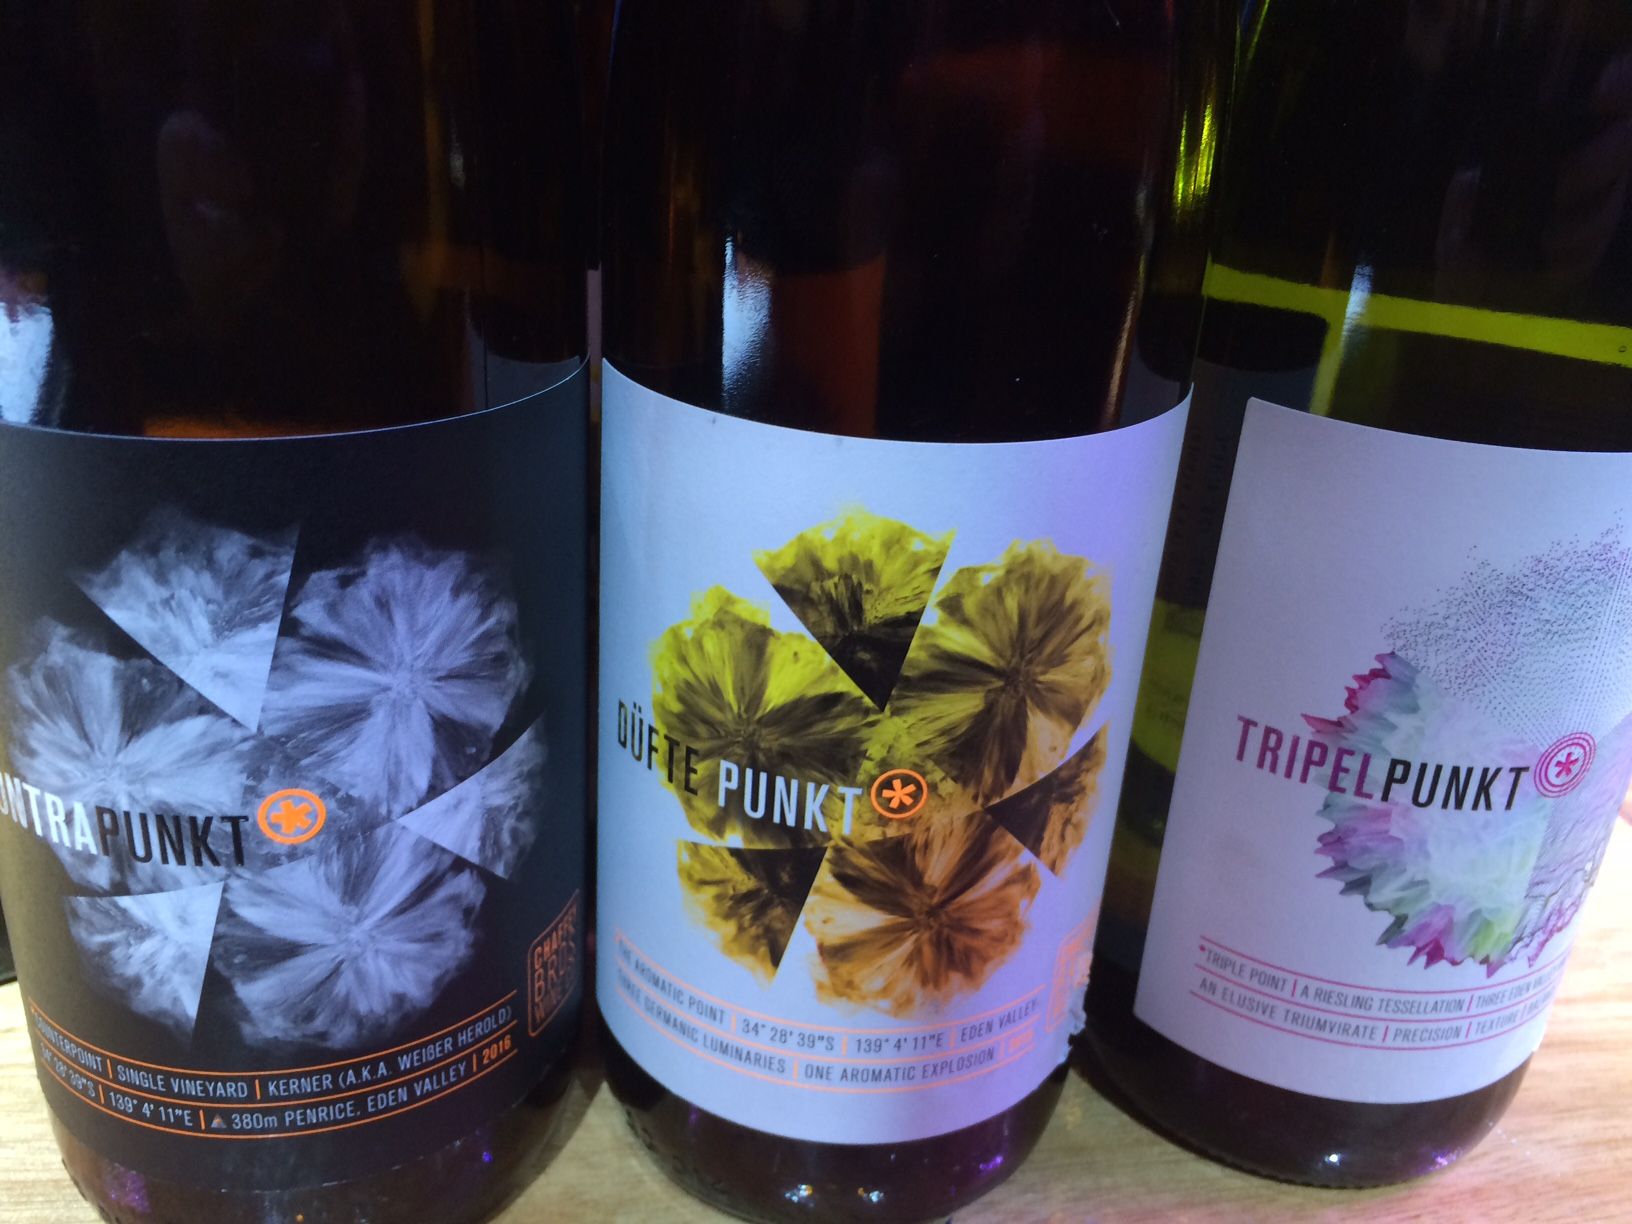 The art of Riesling stands out at Artisans of Australia tasting